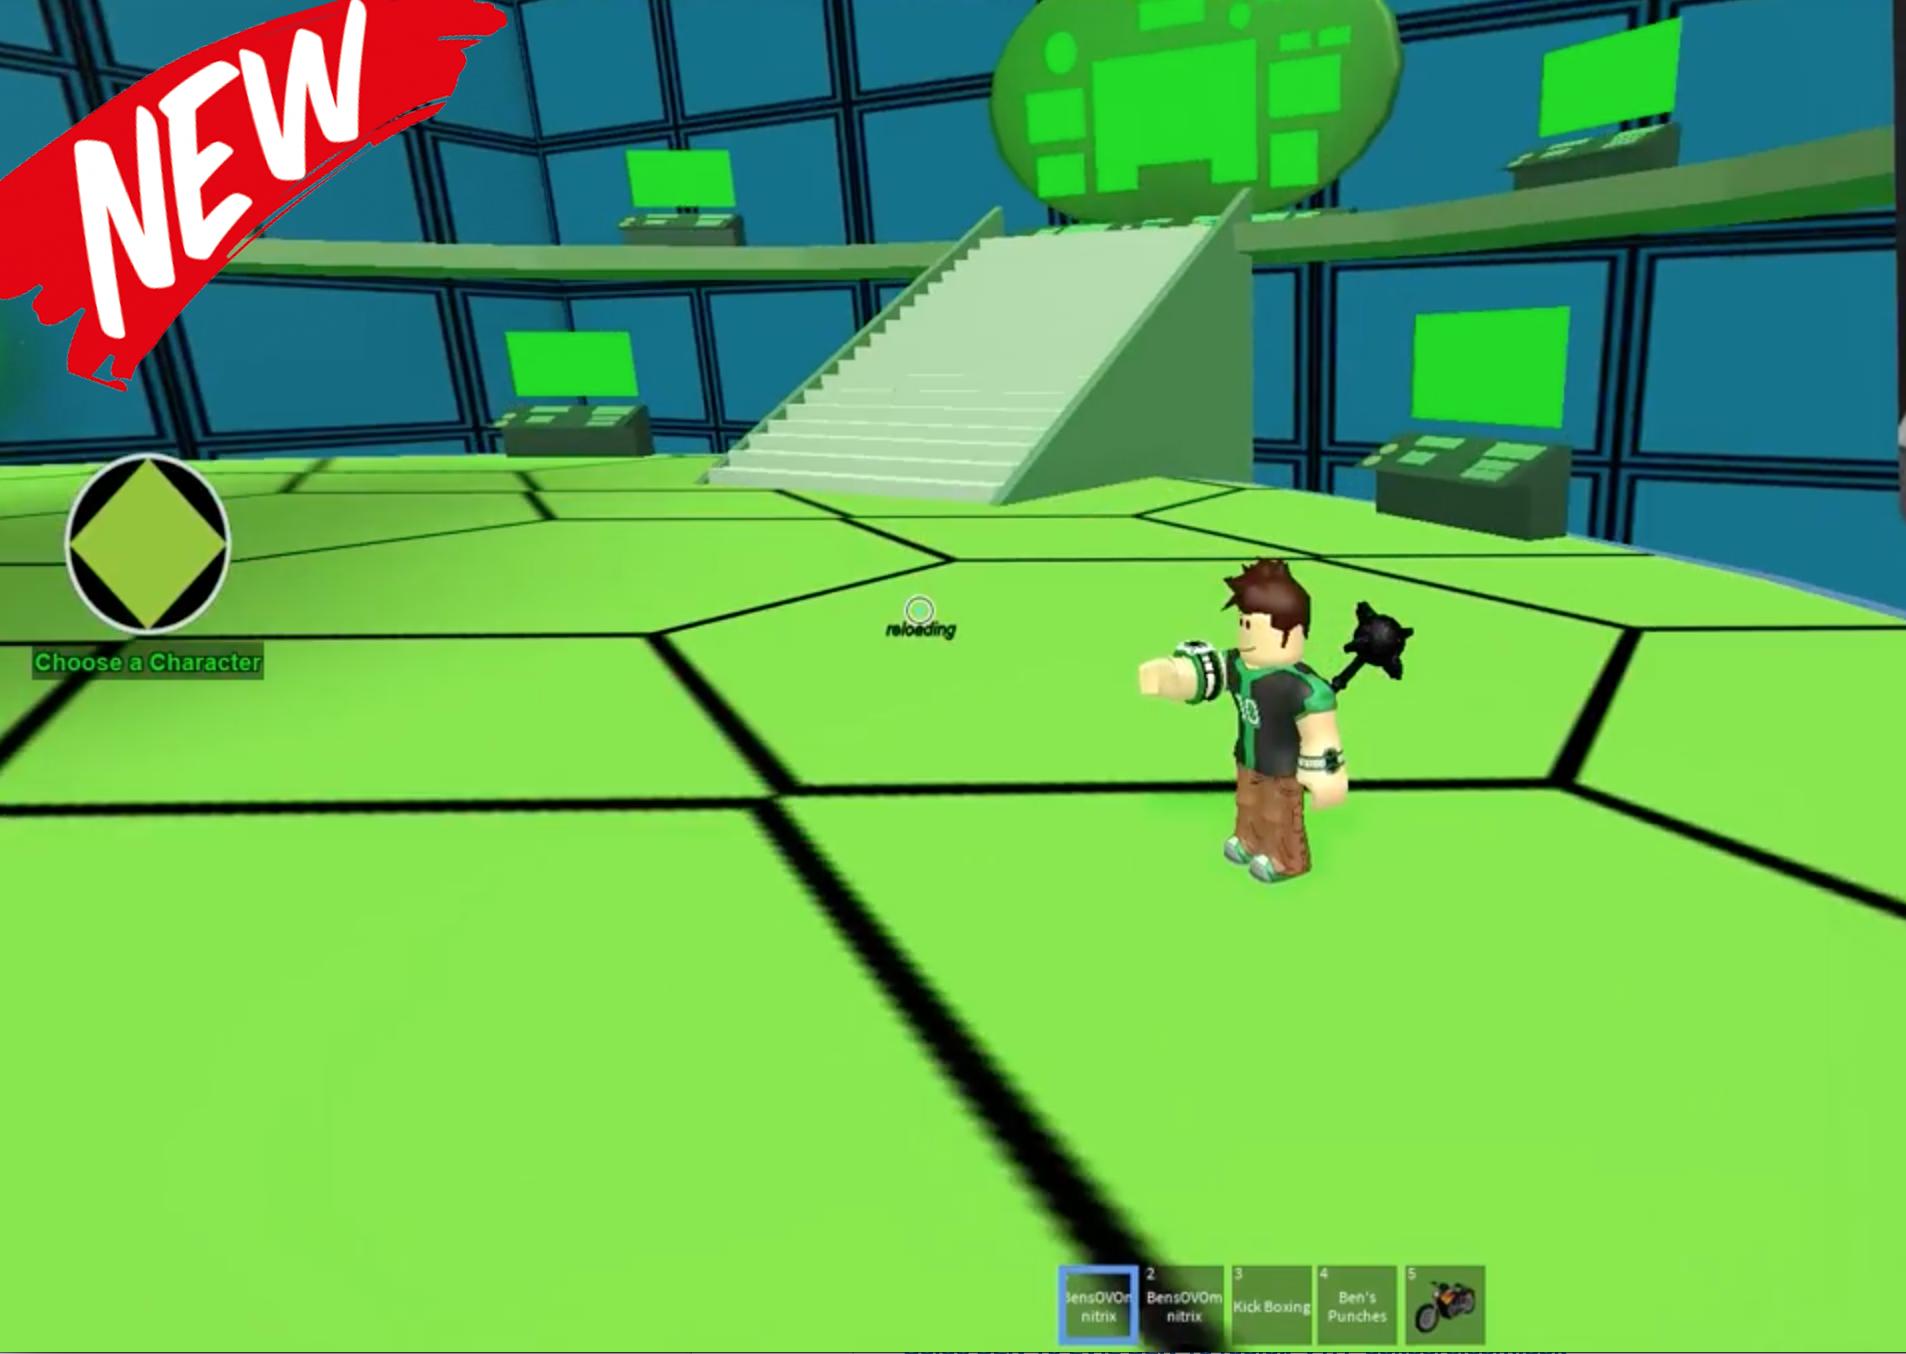 Guide For Ben 10 Evil Ben 10 Roblox Pro For Android Apk Download - new guide for ben 10 n evil ben 10 roblox 10 apk